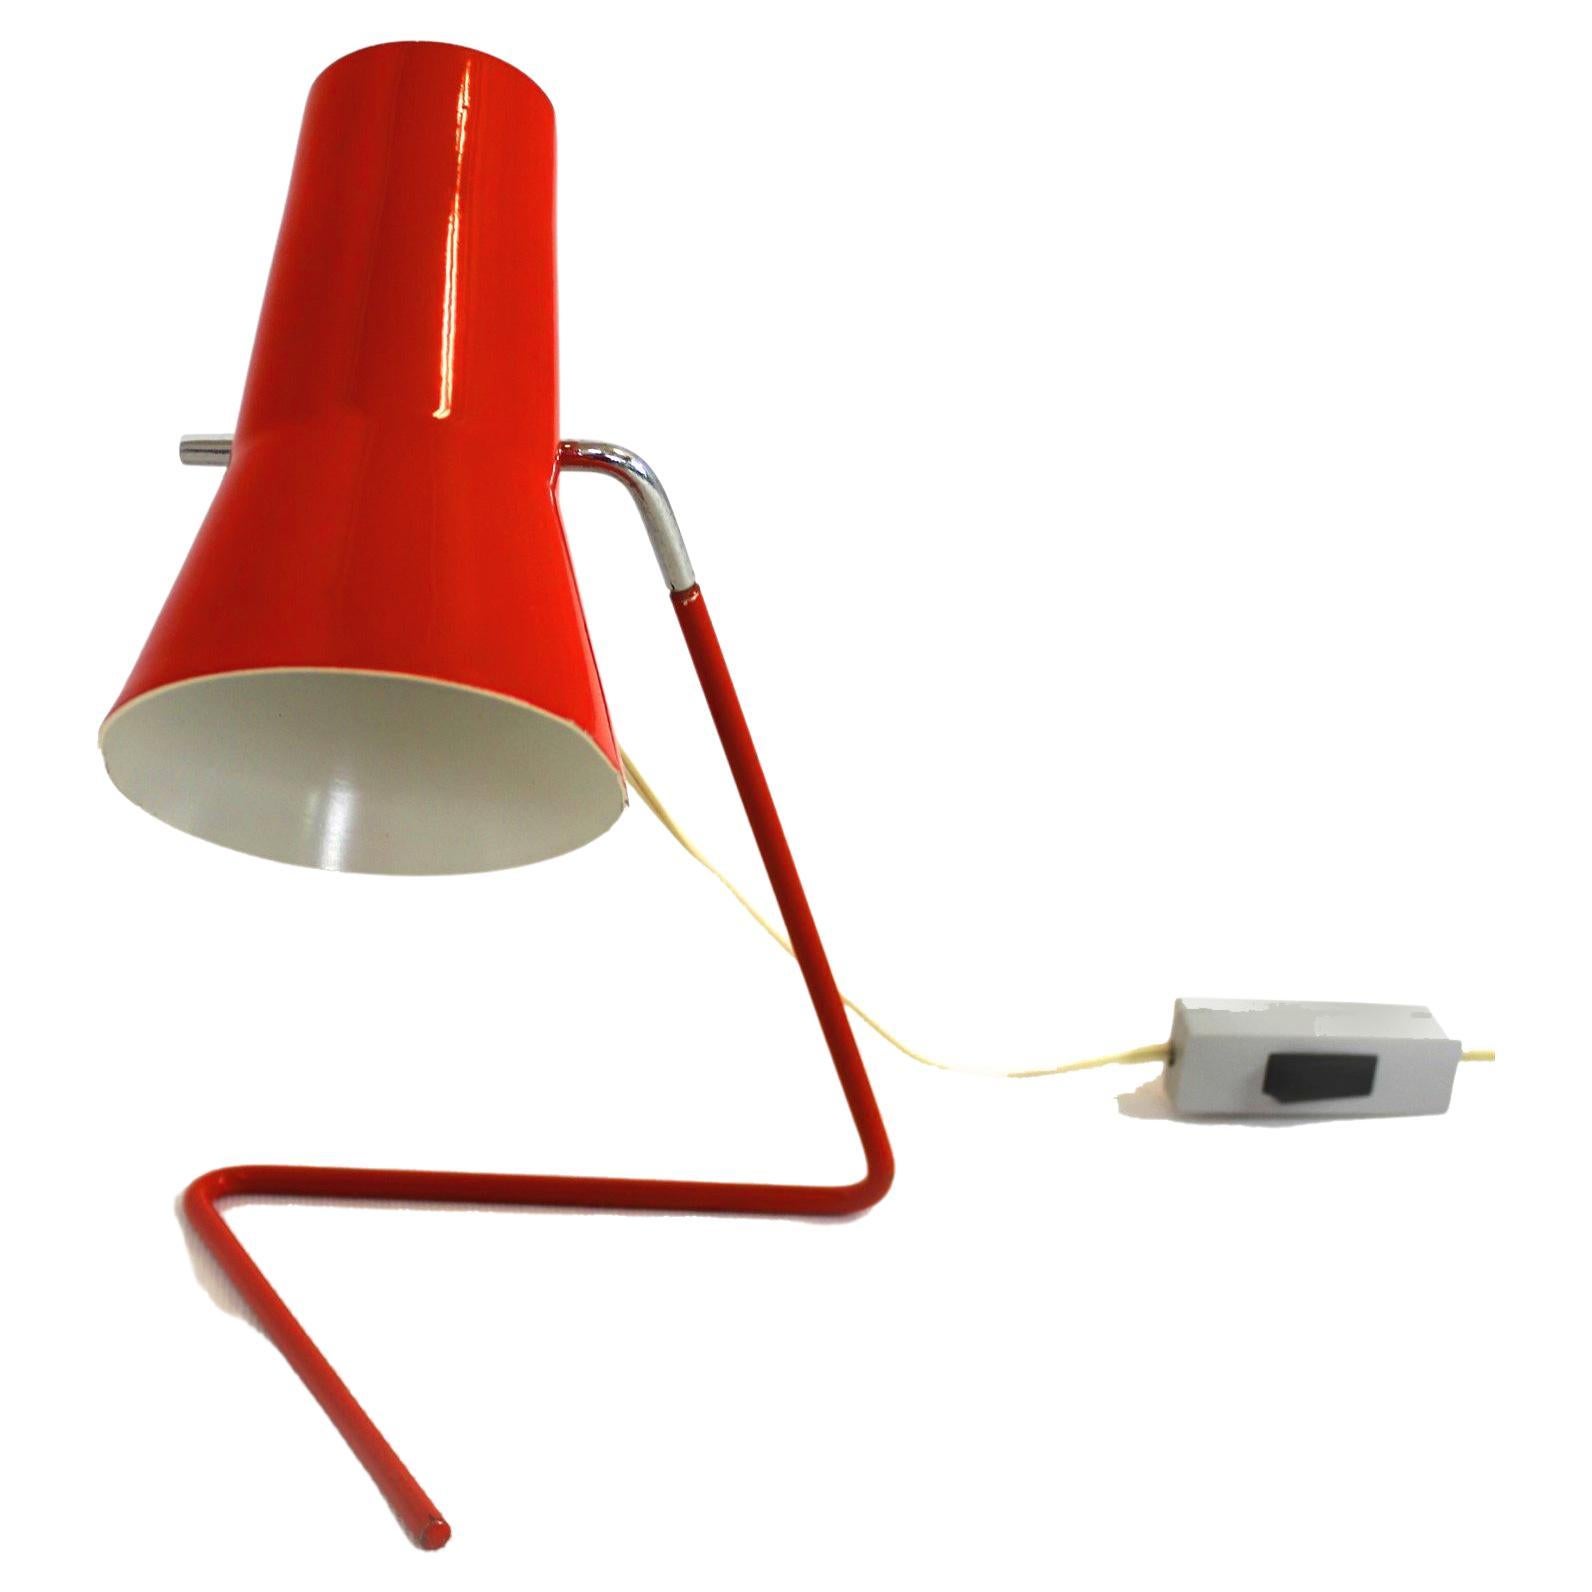 Red Table Lamp by Josef Hurka for Drupol, 1960s